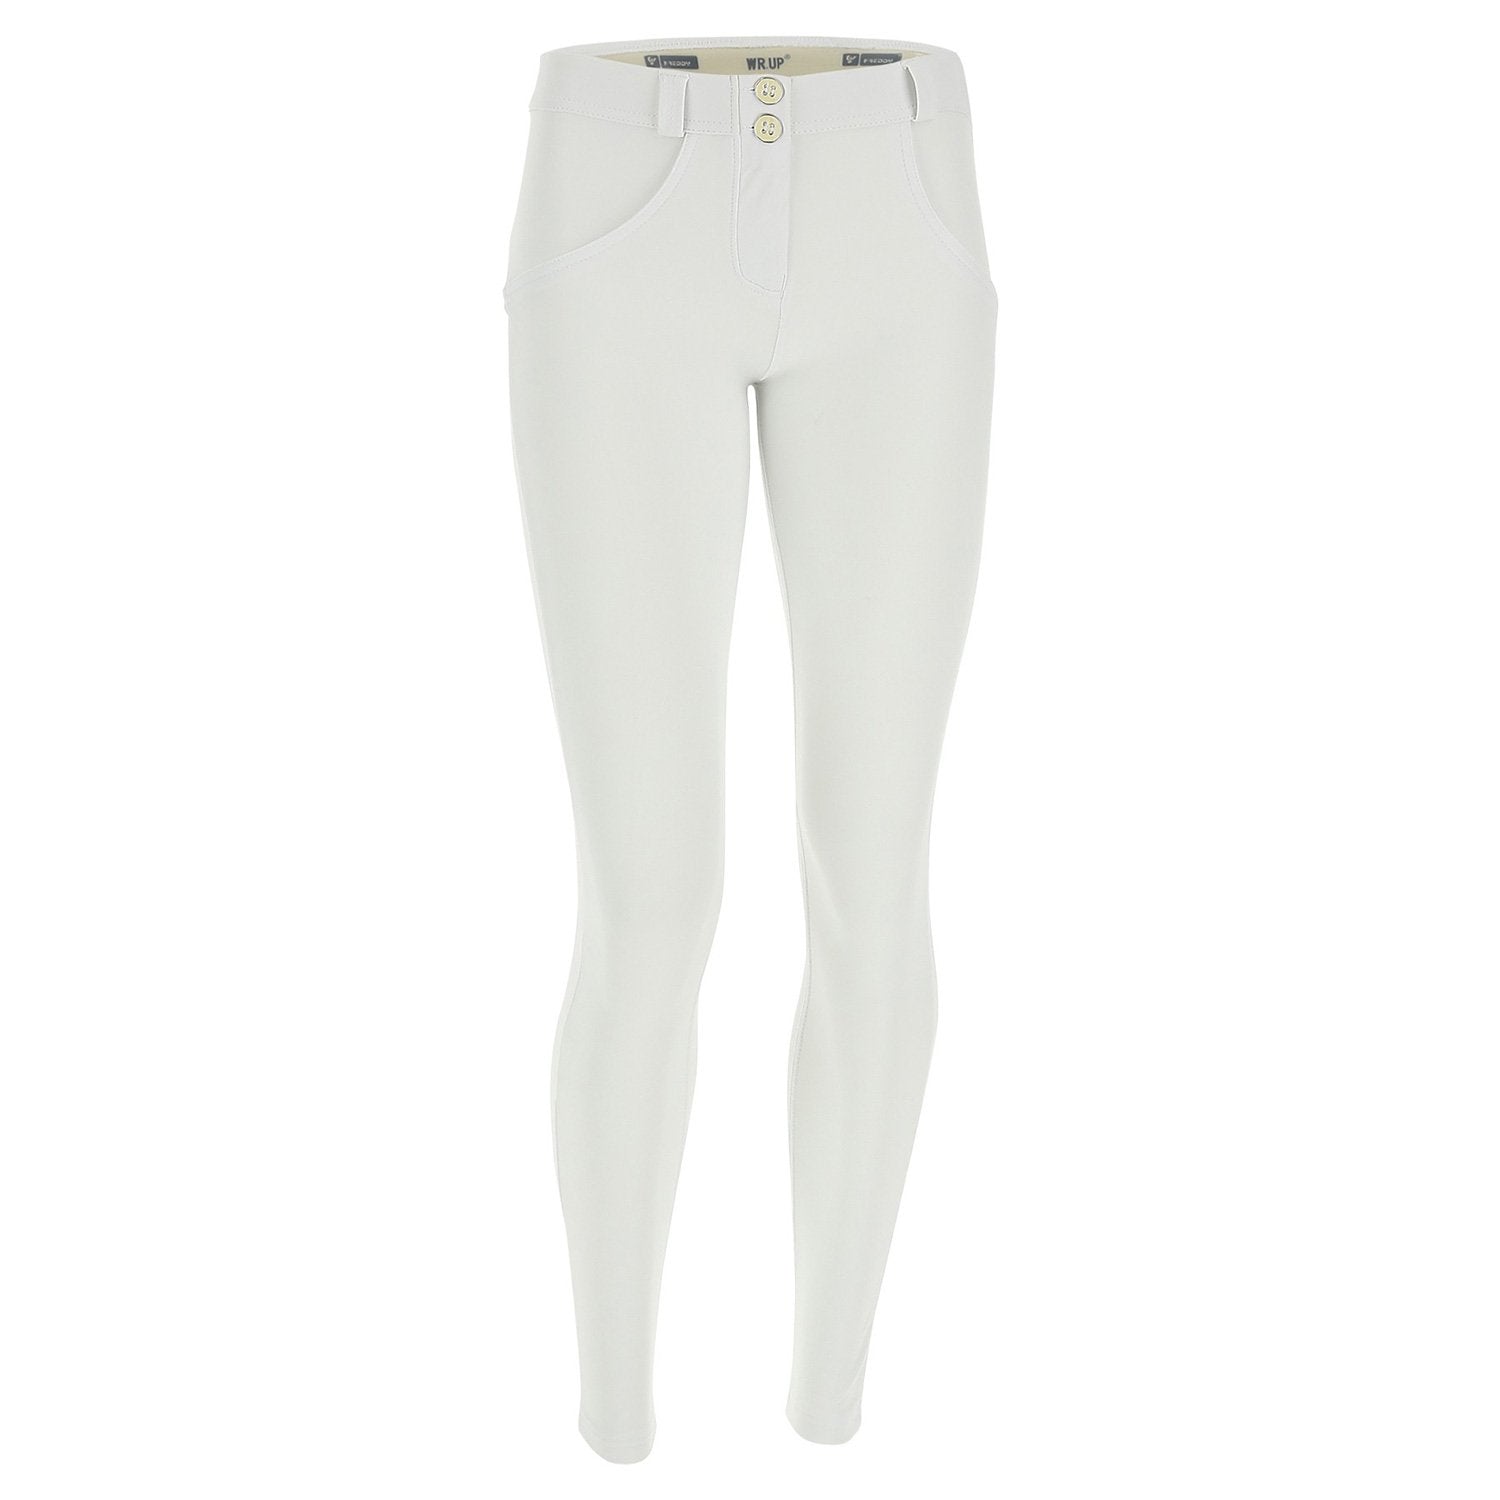 WR.UP® D.I.W.O.® Pro - Classic Rise Full Length - White - Freddy by LIVIFY